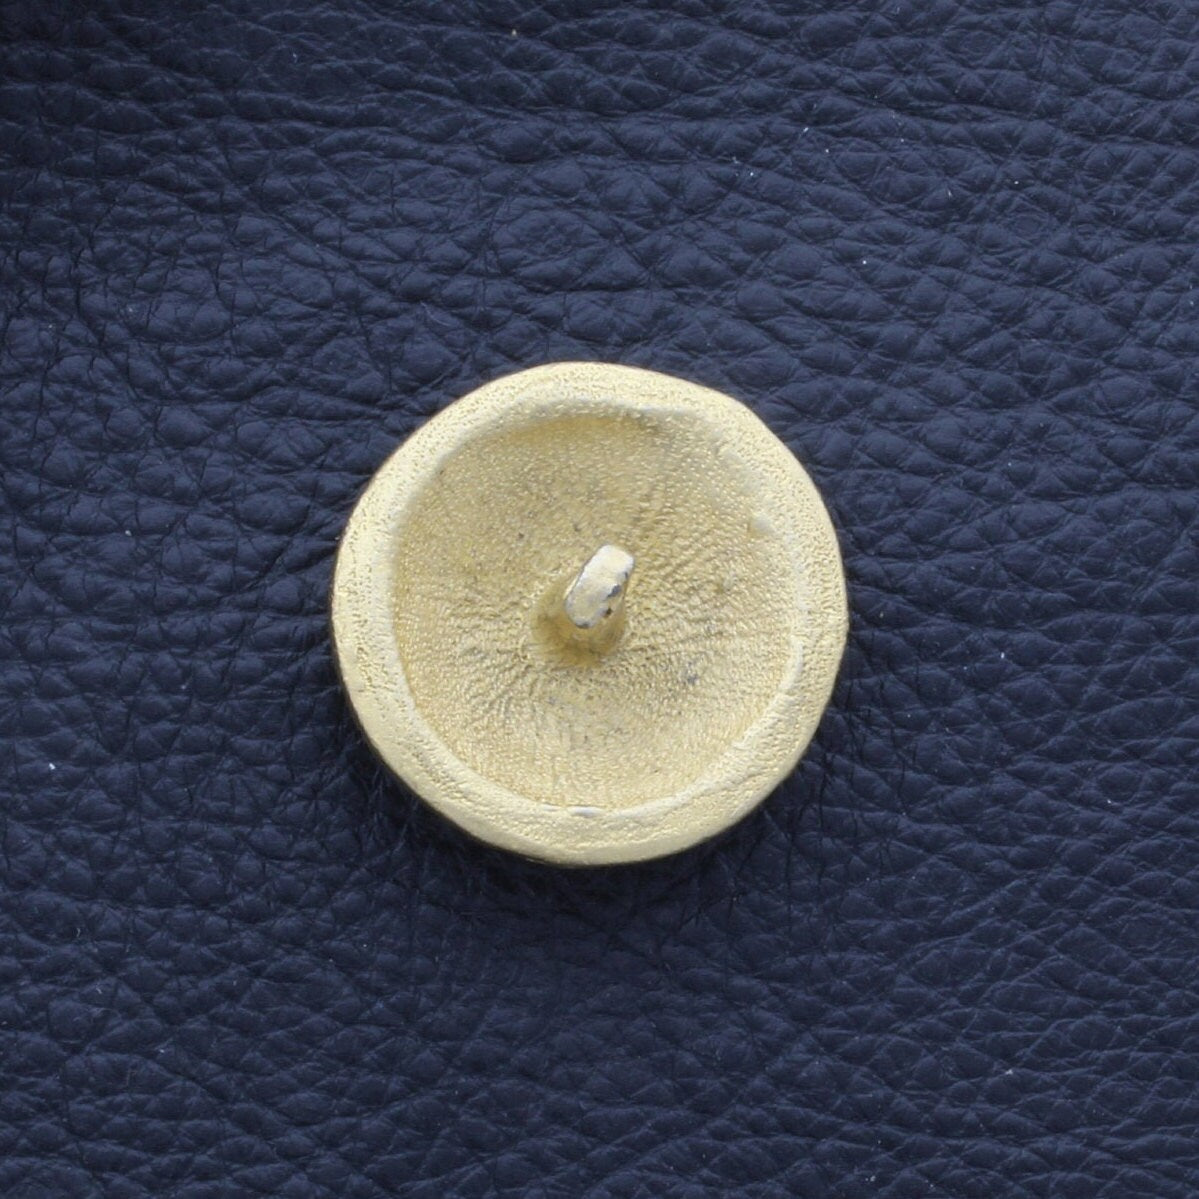 Textured Shank Button, Turtle Back Design, Hamilton gold plate, 30mm, round, Made in USA, pack of 4